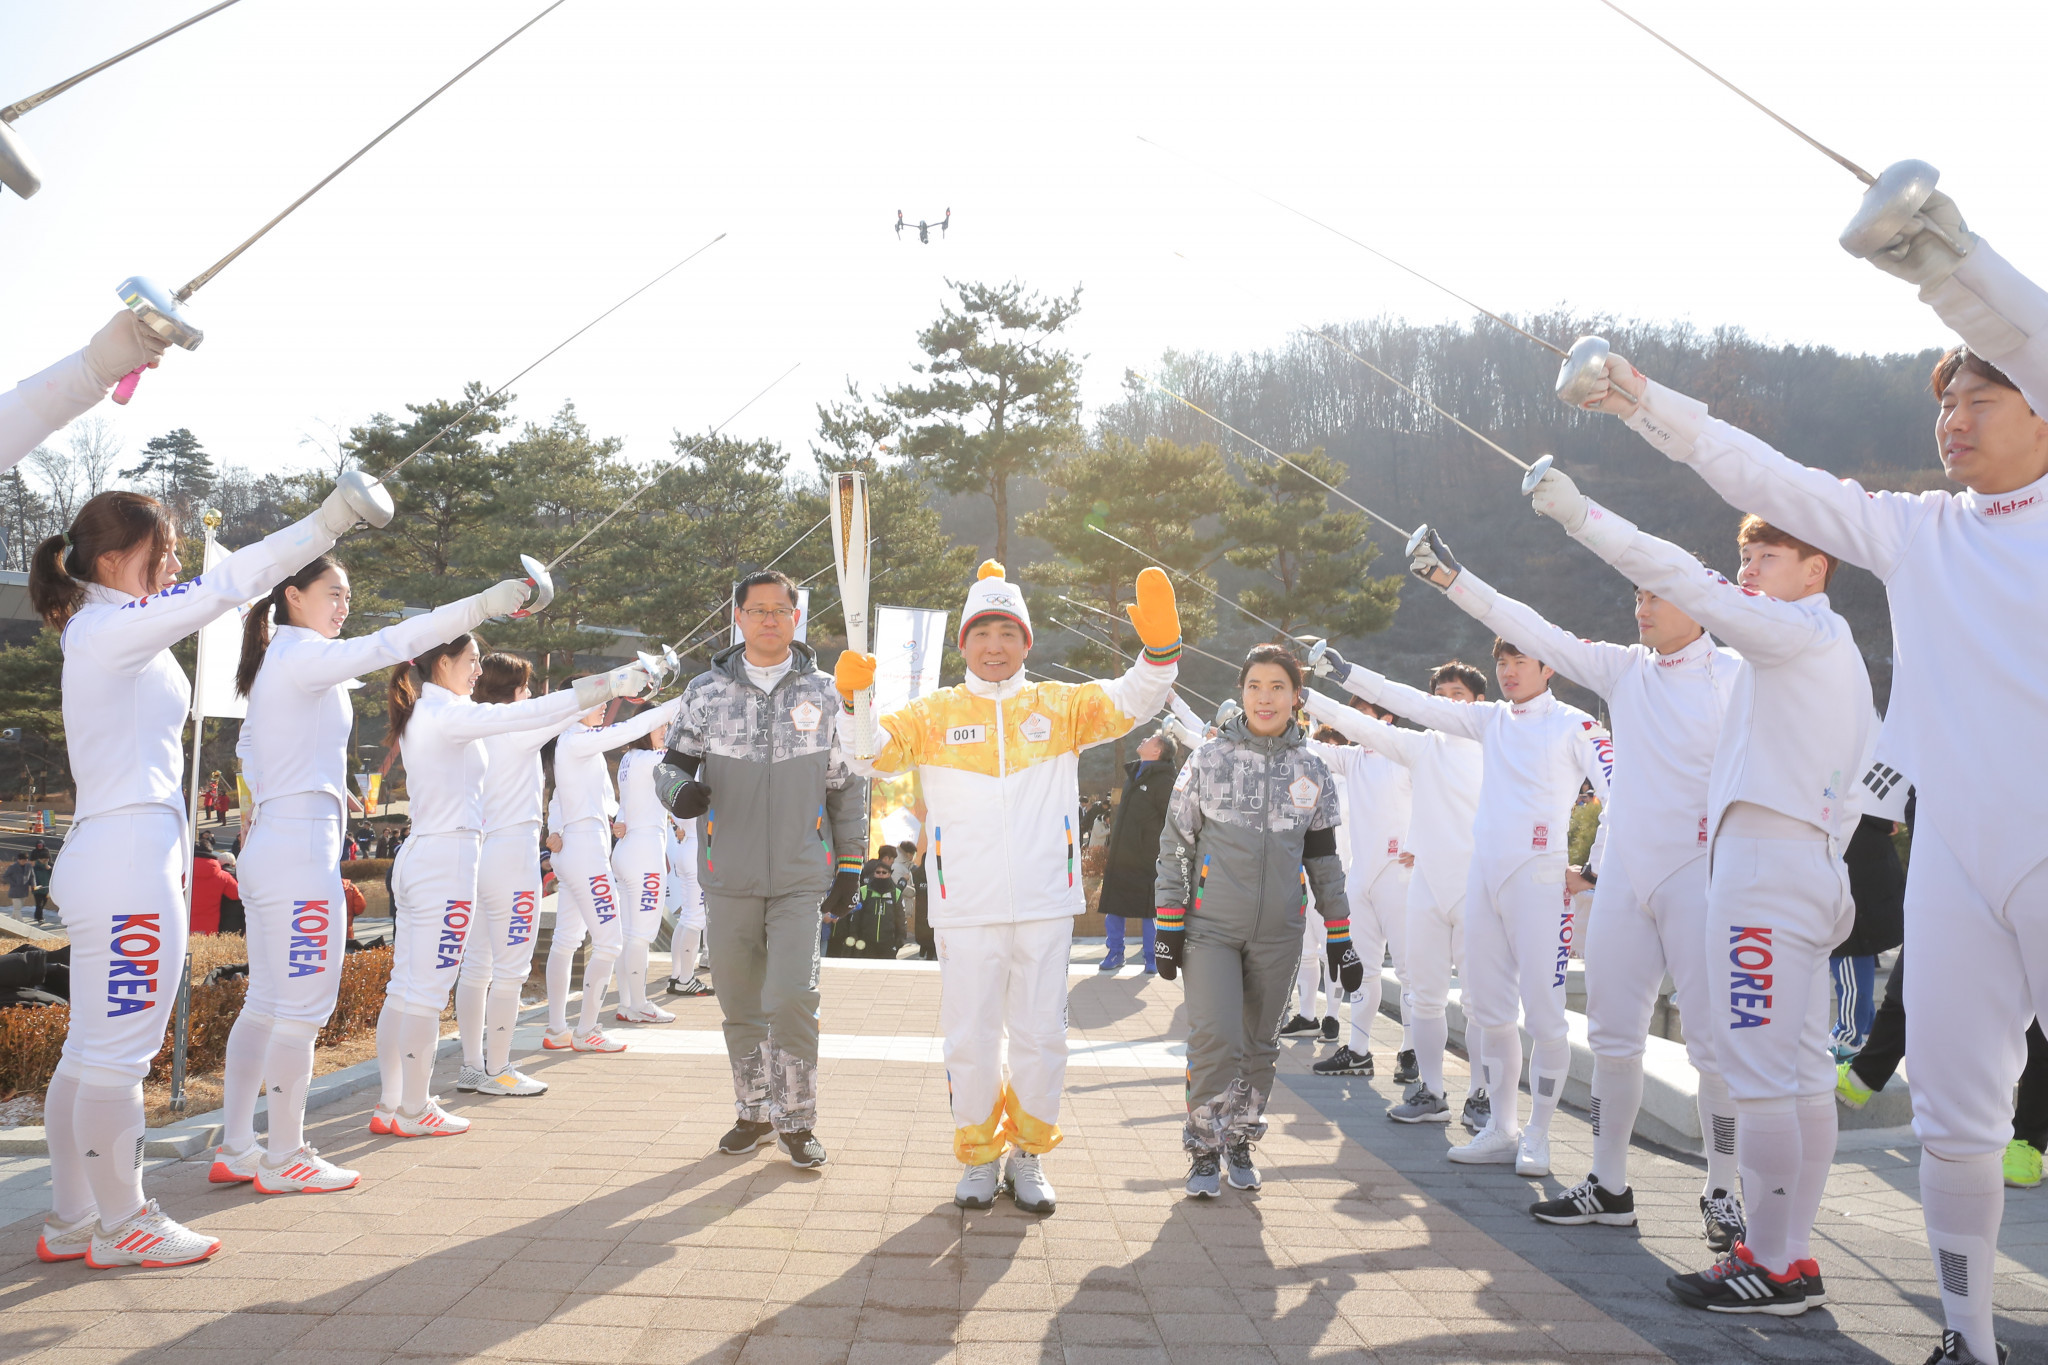 South Korean fencers form a Guard of Honour to welcome the Torch and everywhere it goes it is greeted with a smile ©Pyeongchang2018